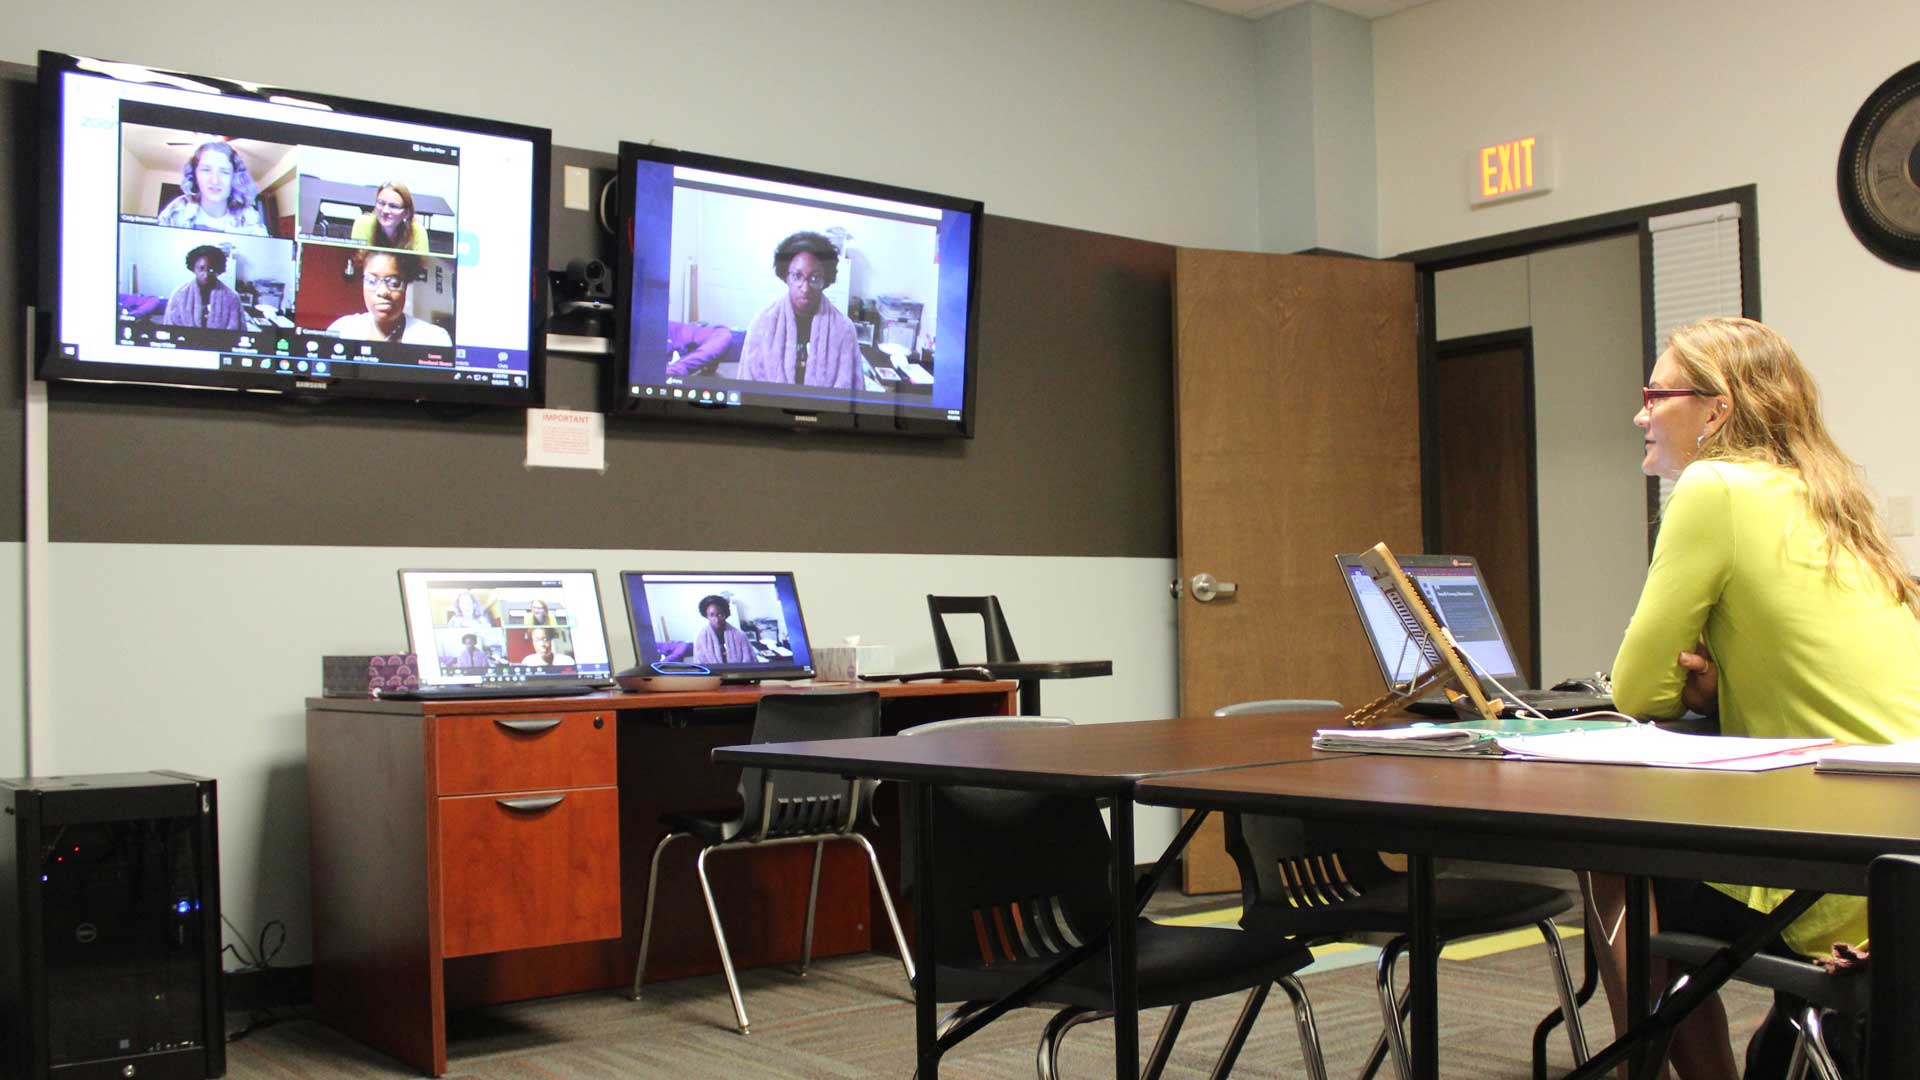 Professor speaking with students on multiple zoom screens